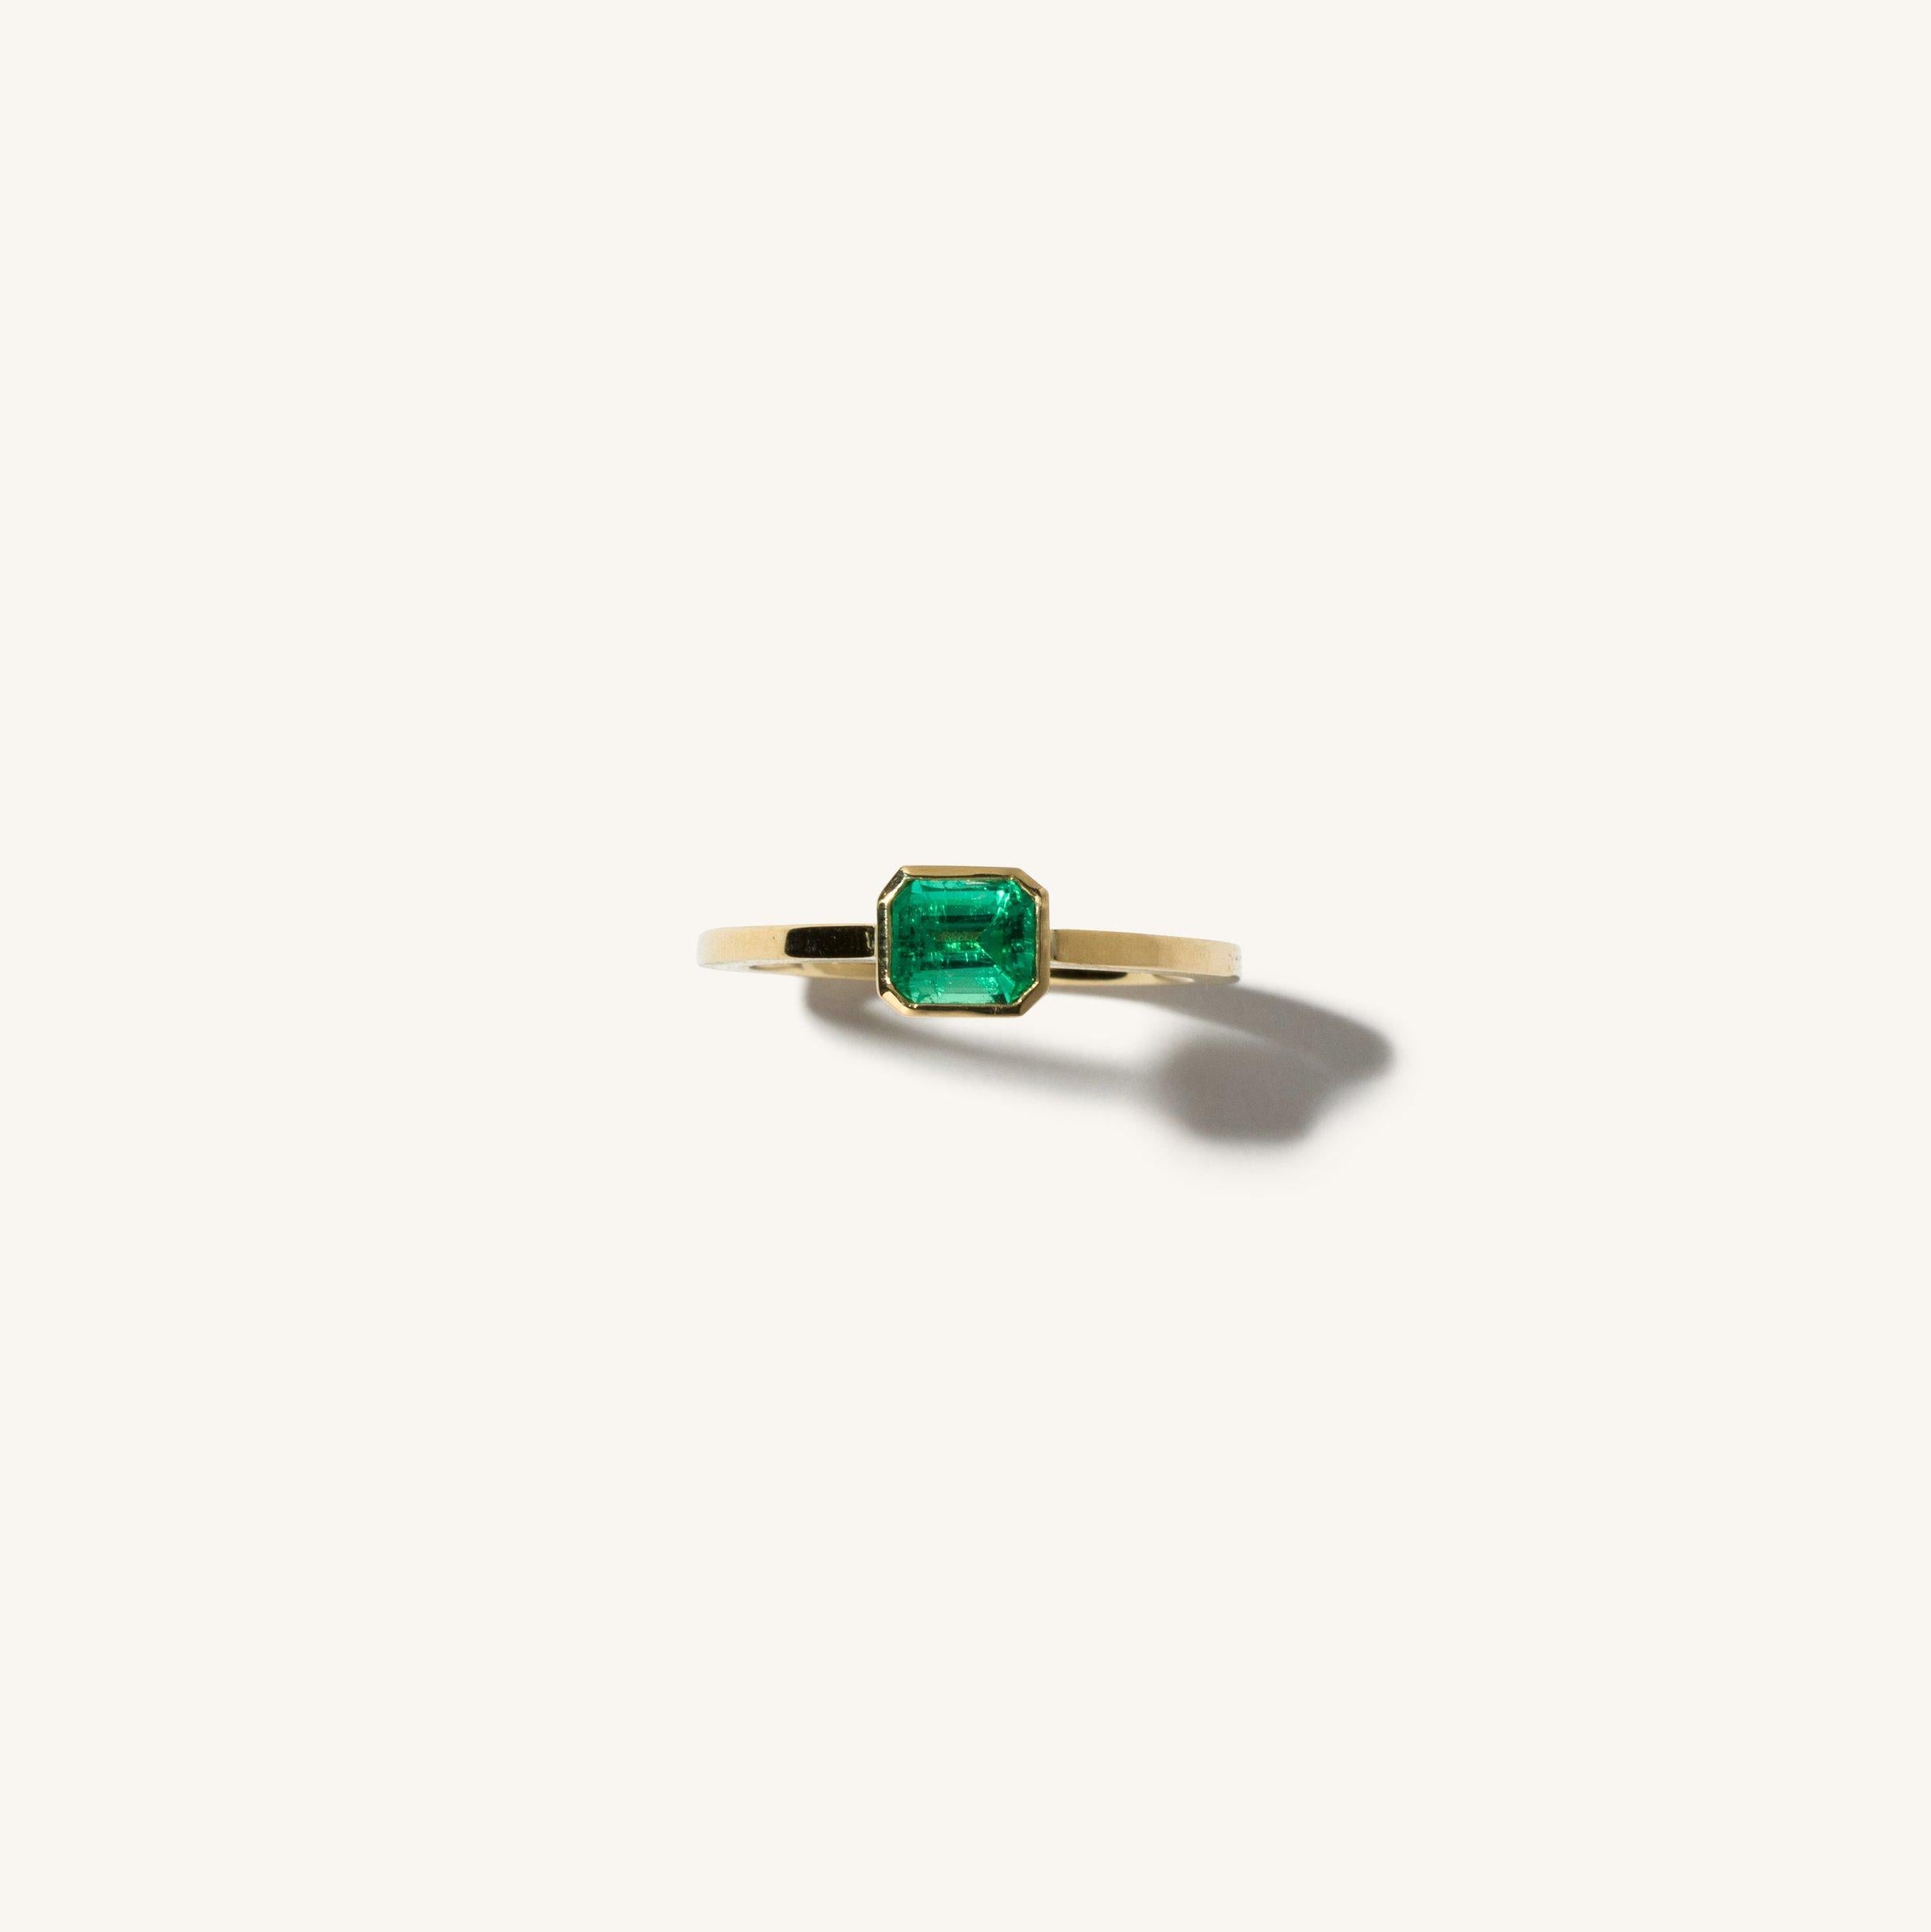 An effortless addition to your everyday essential jewelry. The emerald stone is known as the symbol of love, so why not show yourself and others the love that you have to give. Crafted with 18 karat yellow gold. 

*Please note that this item is made